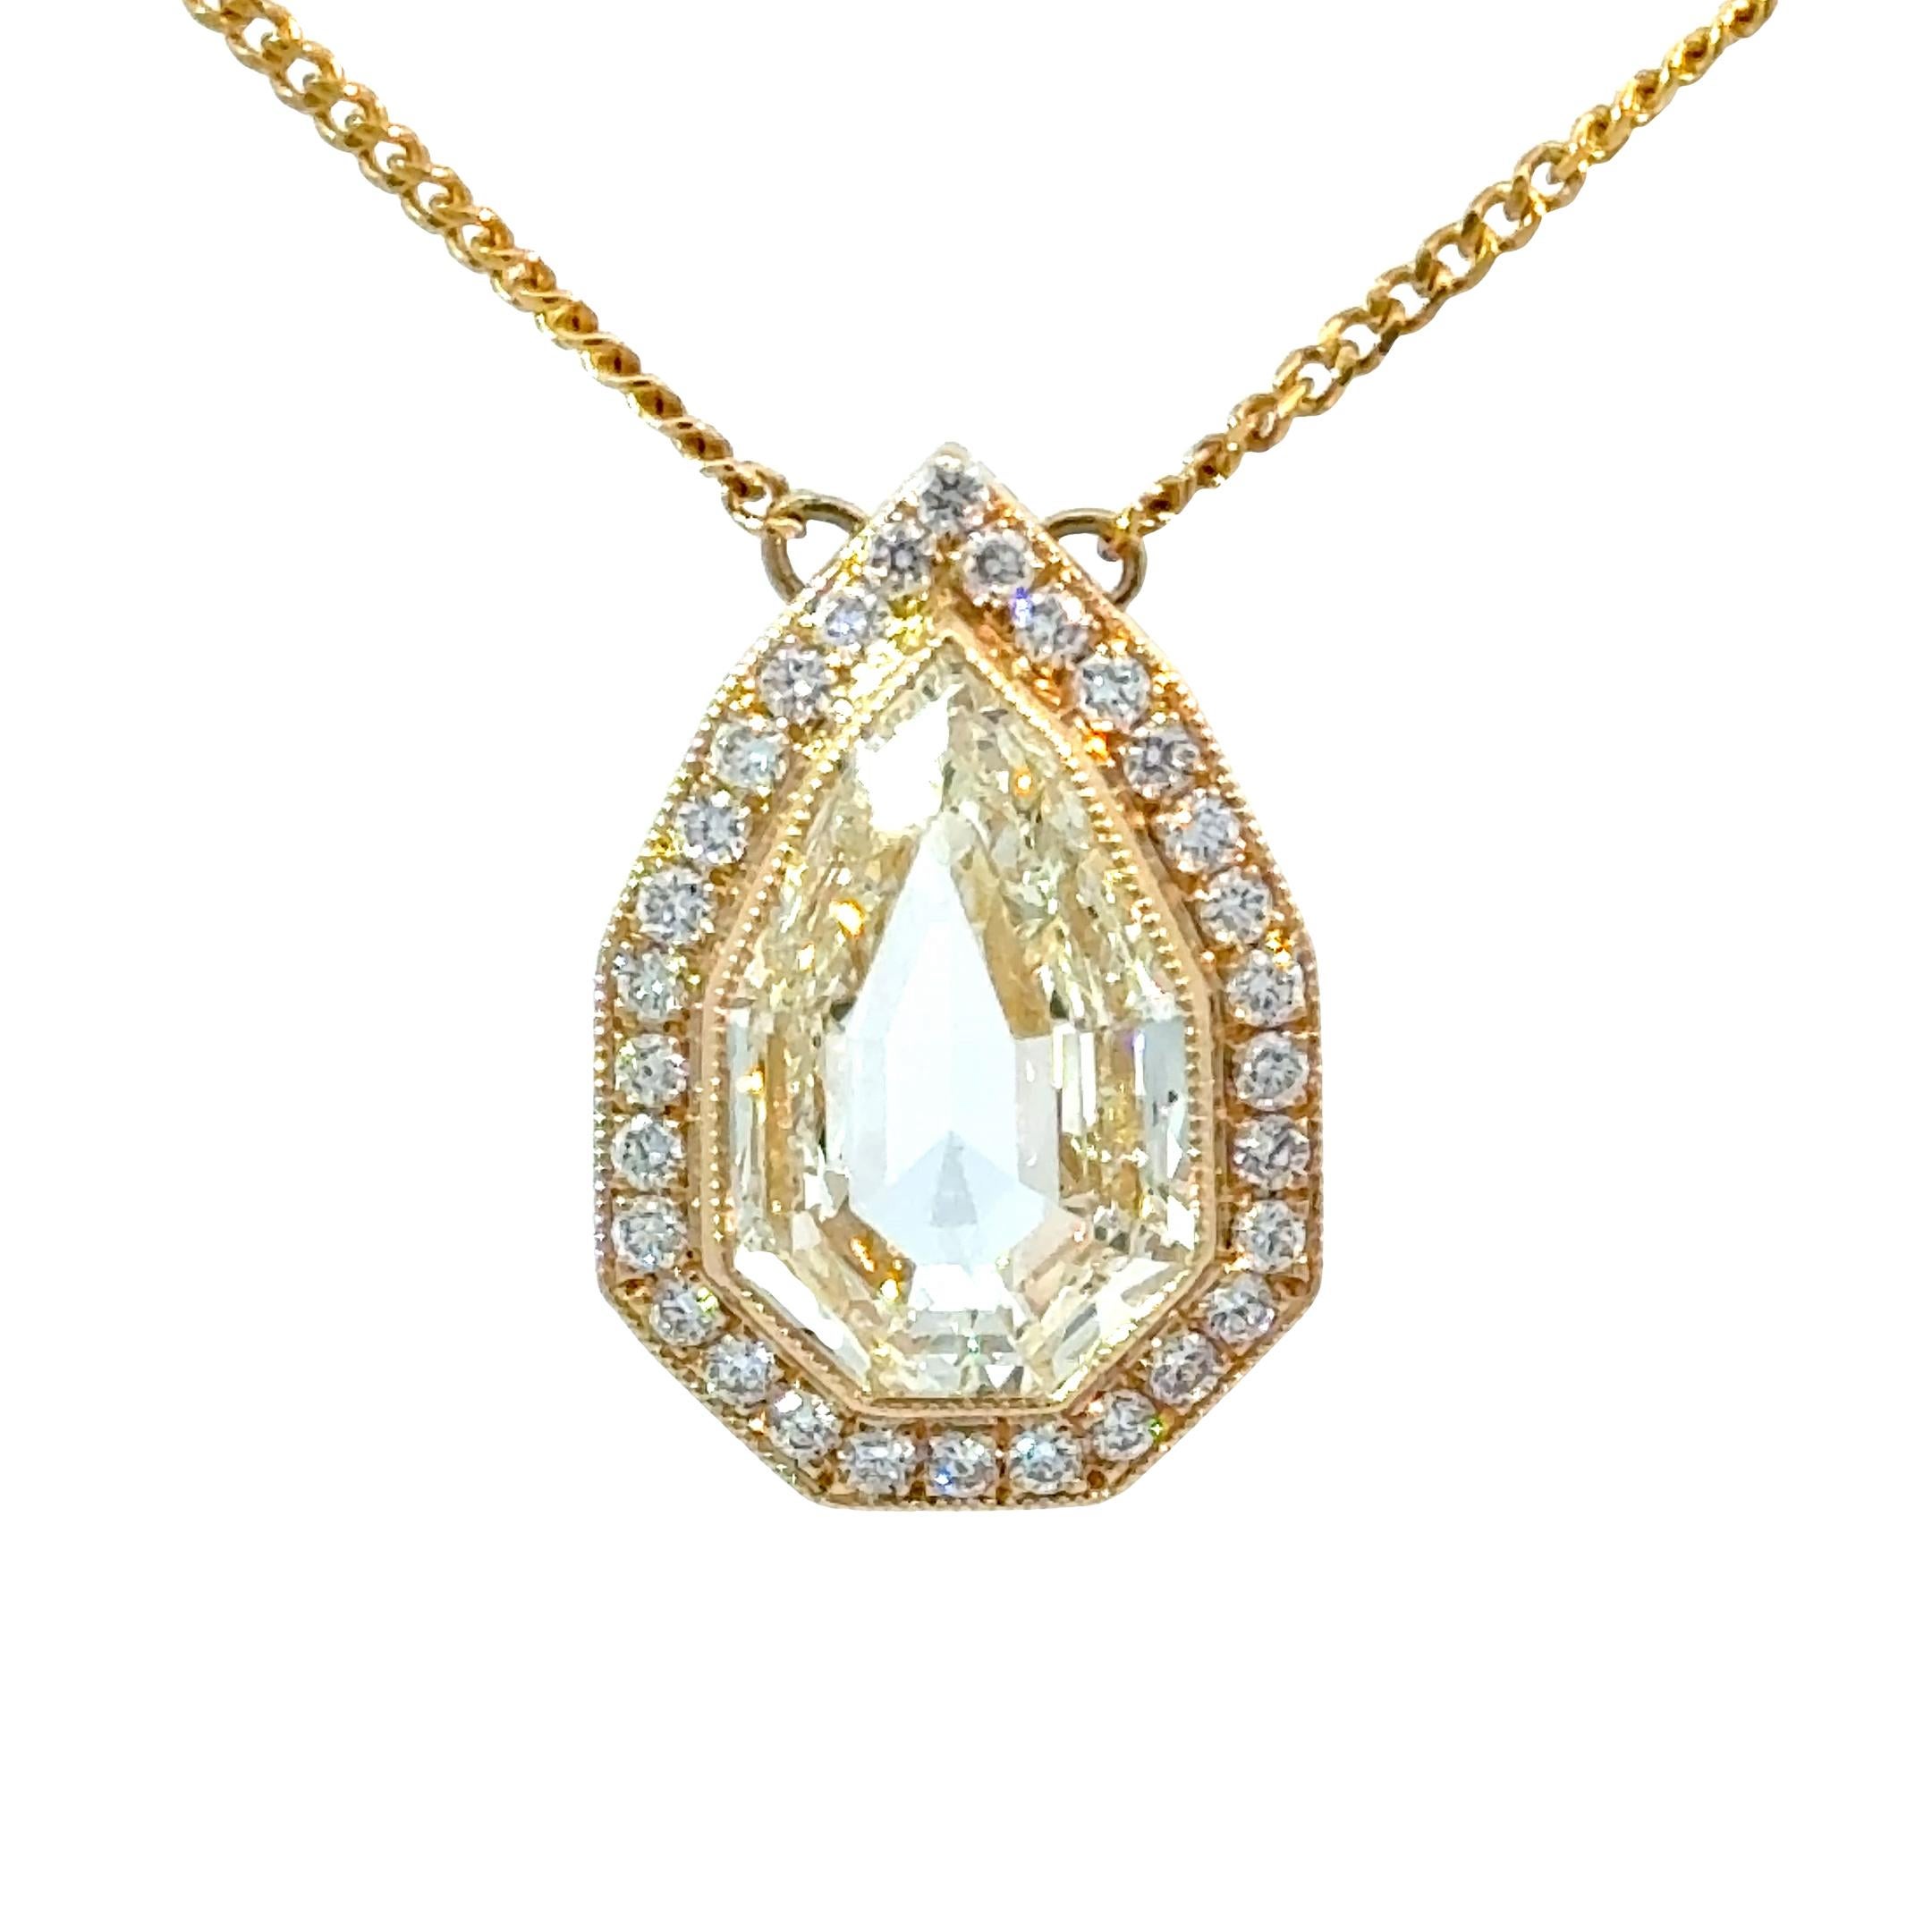 A modern natural GIA certified Pear Step Cut diamond with an Art Deco style cut.
Center stone weight 3.02 Carat. Light Yellow Color with a beautiful spread of 13.03 x 7.97 mm.
Set in a 18kt Yellow Gold hand made pendant with bezel Millgrainand 0.30